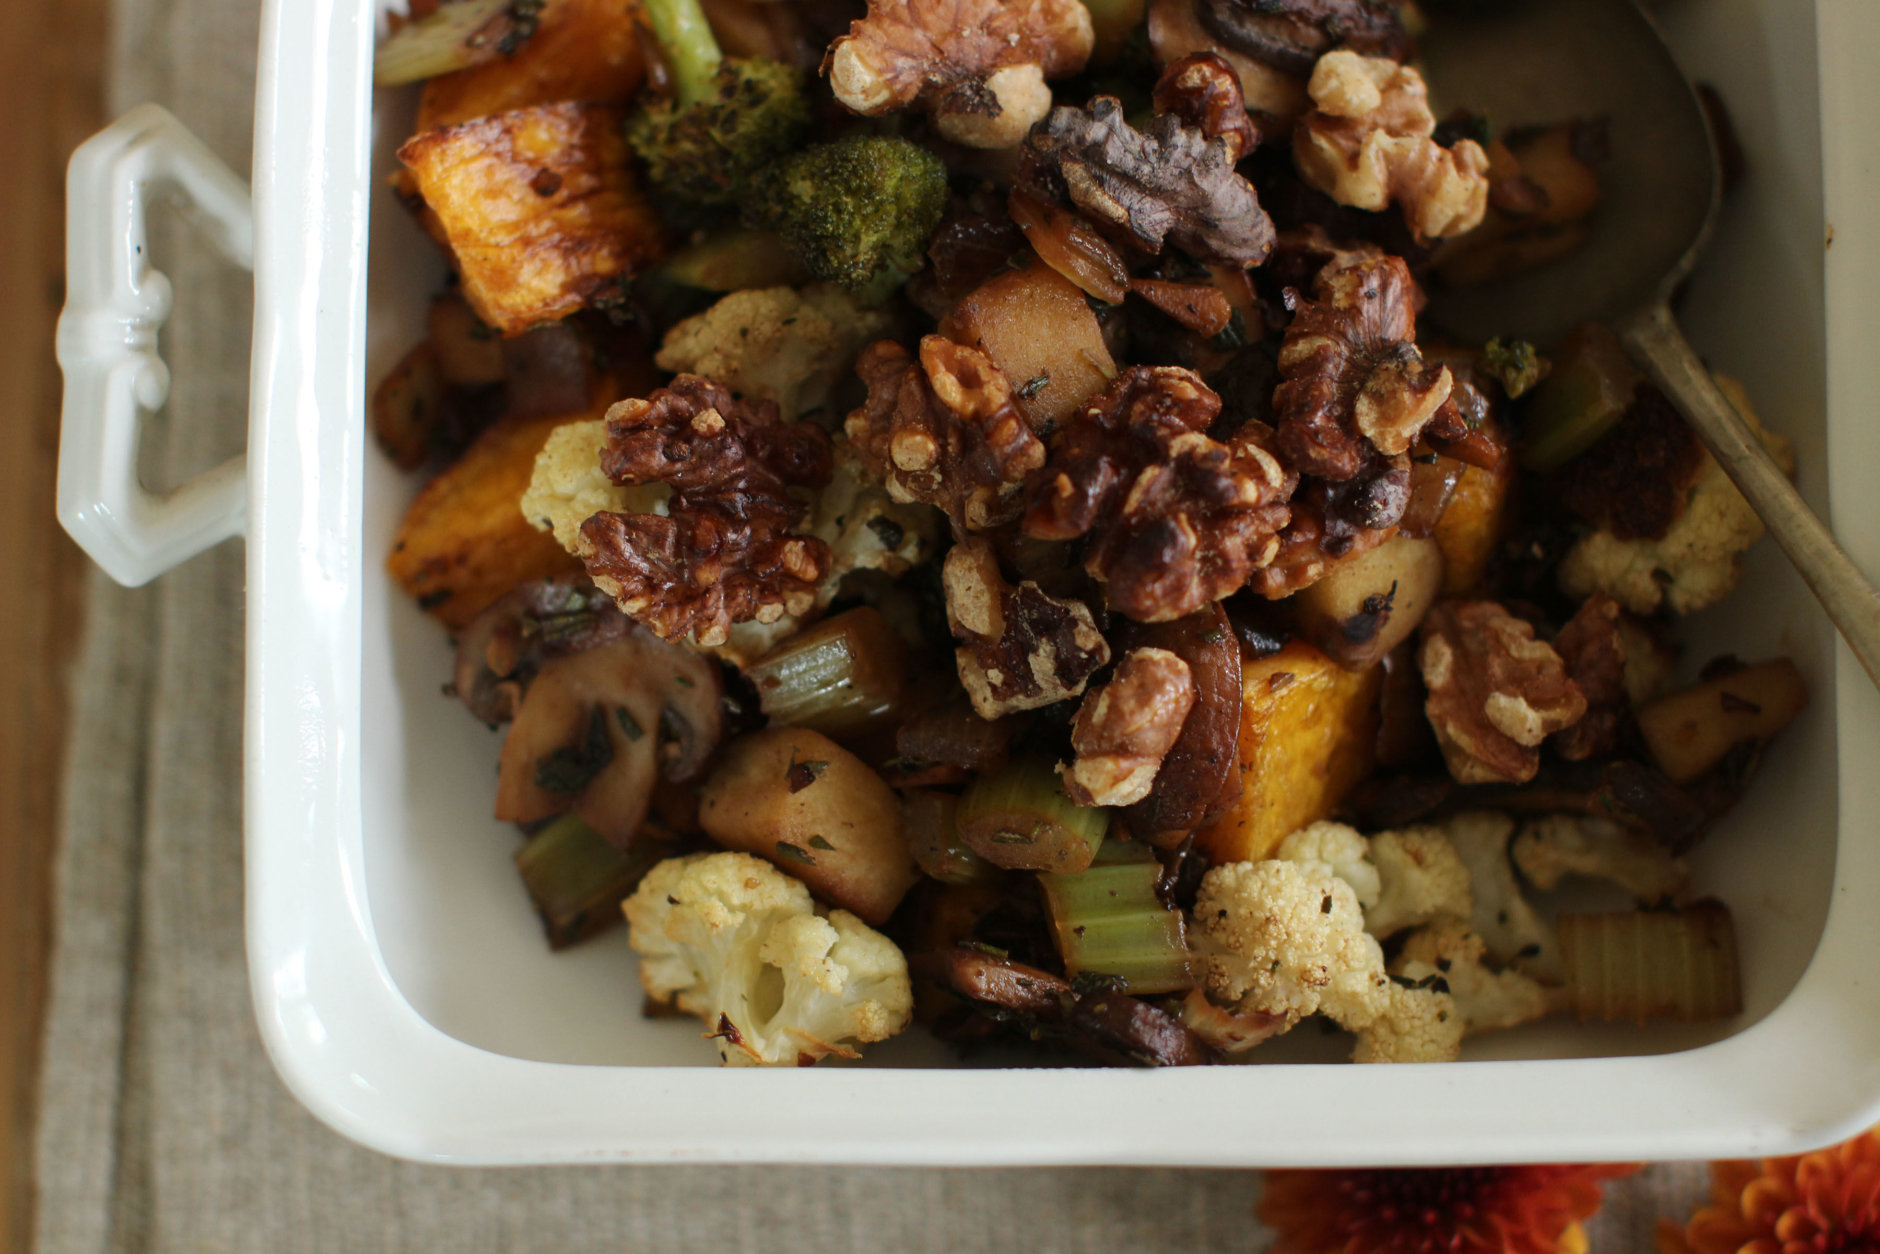 This September 28, 2015 photo shows veggie oven hash in Concord, NH. (AP Photo/Matthew Mead)This This Sept. 28, 2015, photo shows veggie oven hash in Concord, N.H. This recipe relies on a mix of roasted vegetables for a caramelized sweetness that feels roasty and homey. (AP Photo/Matthew Mead)